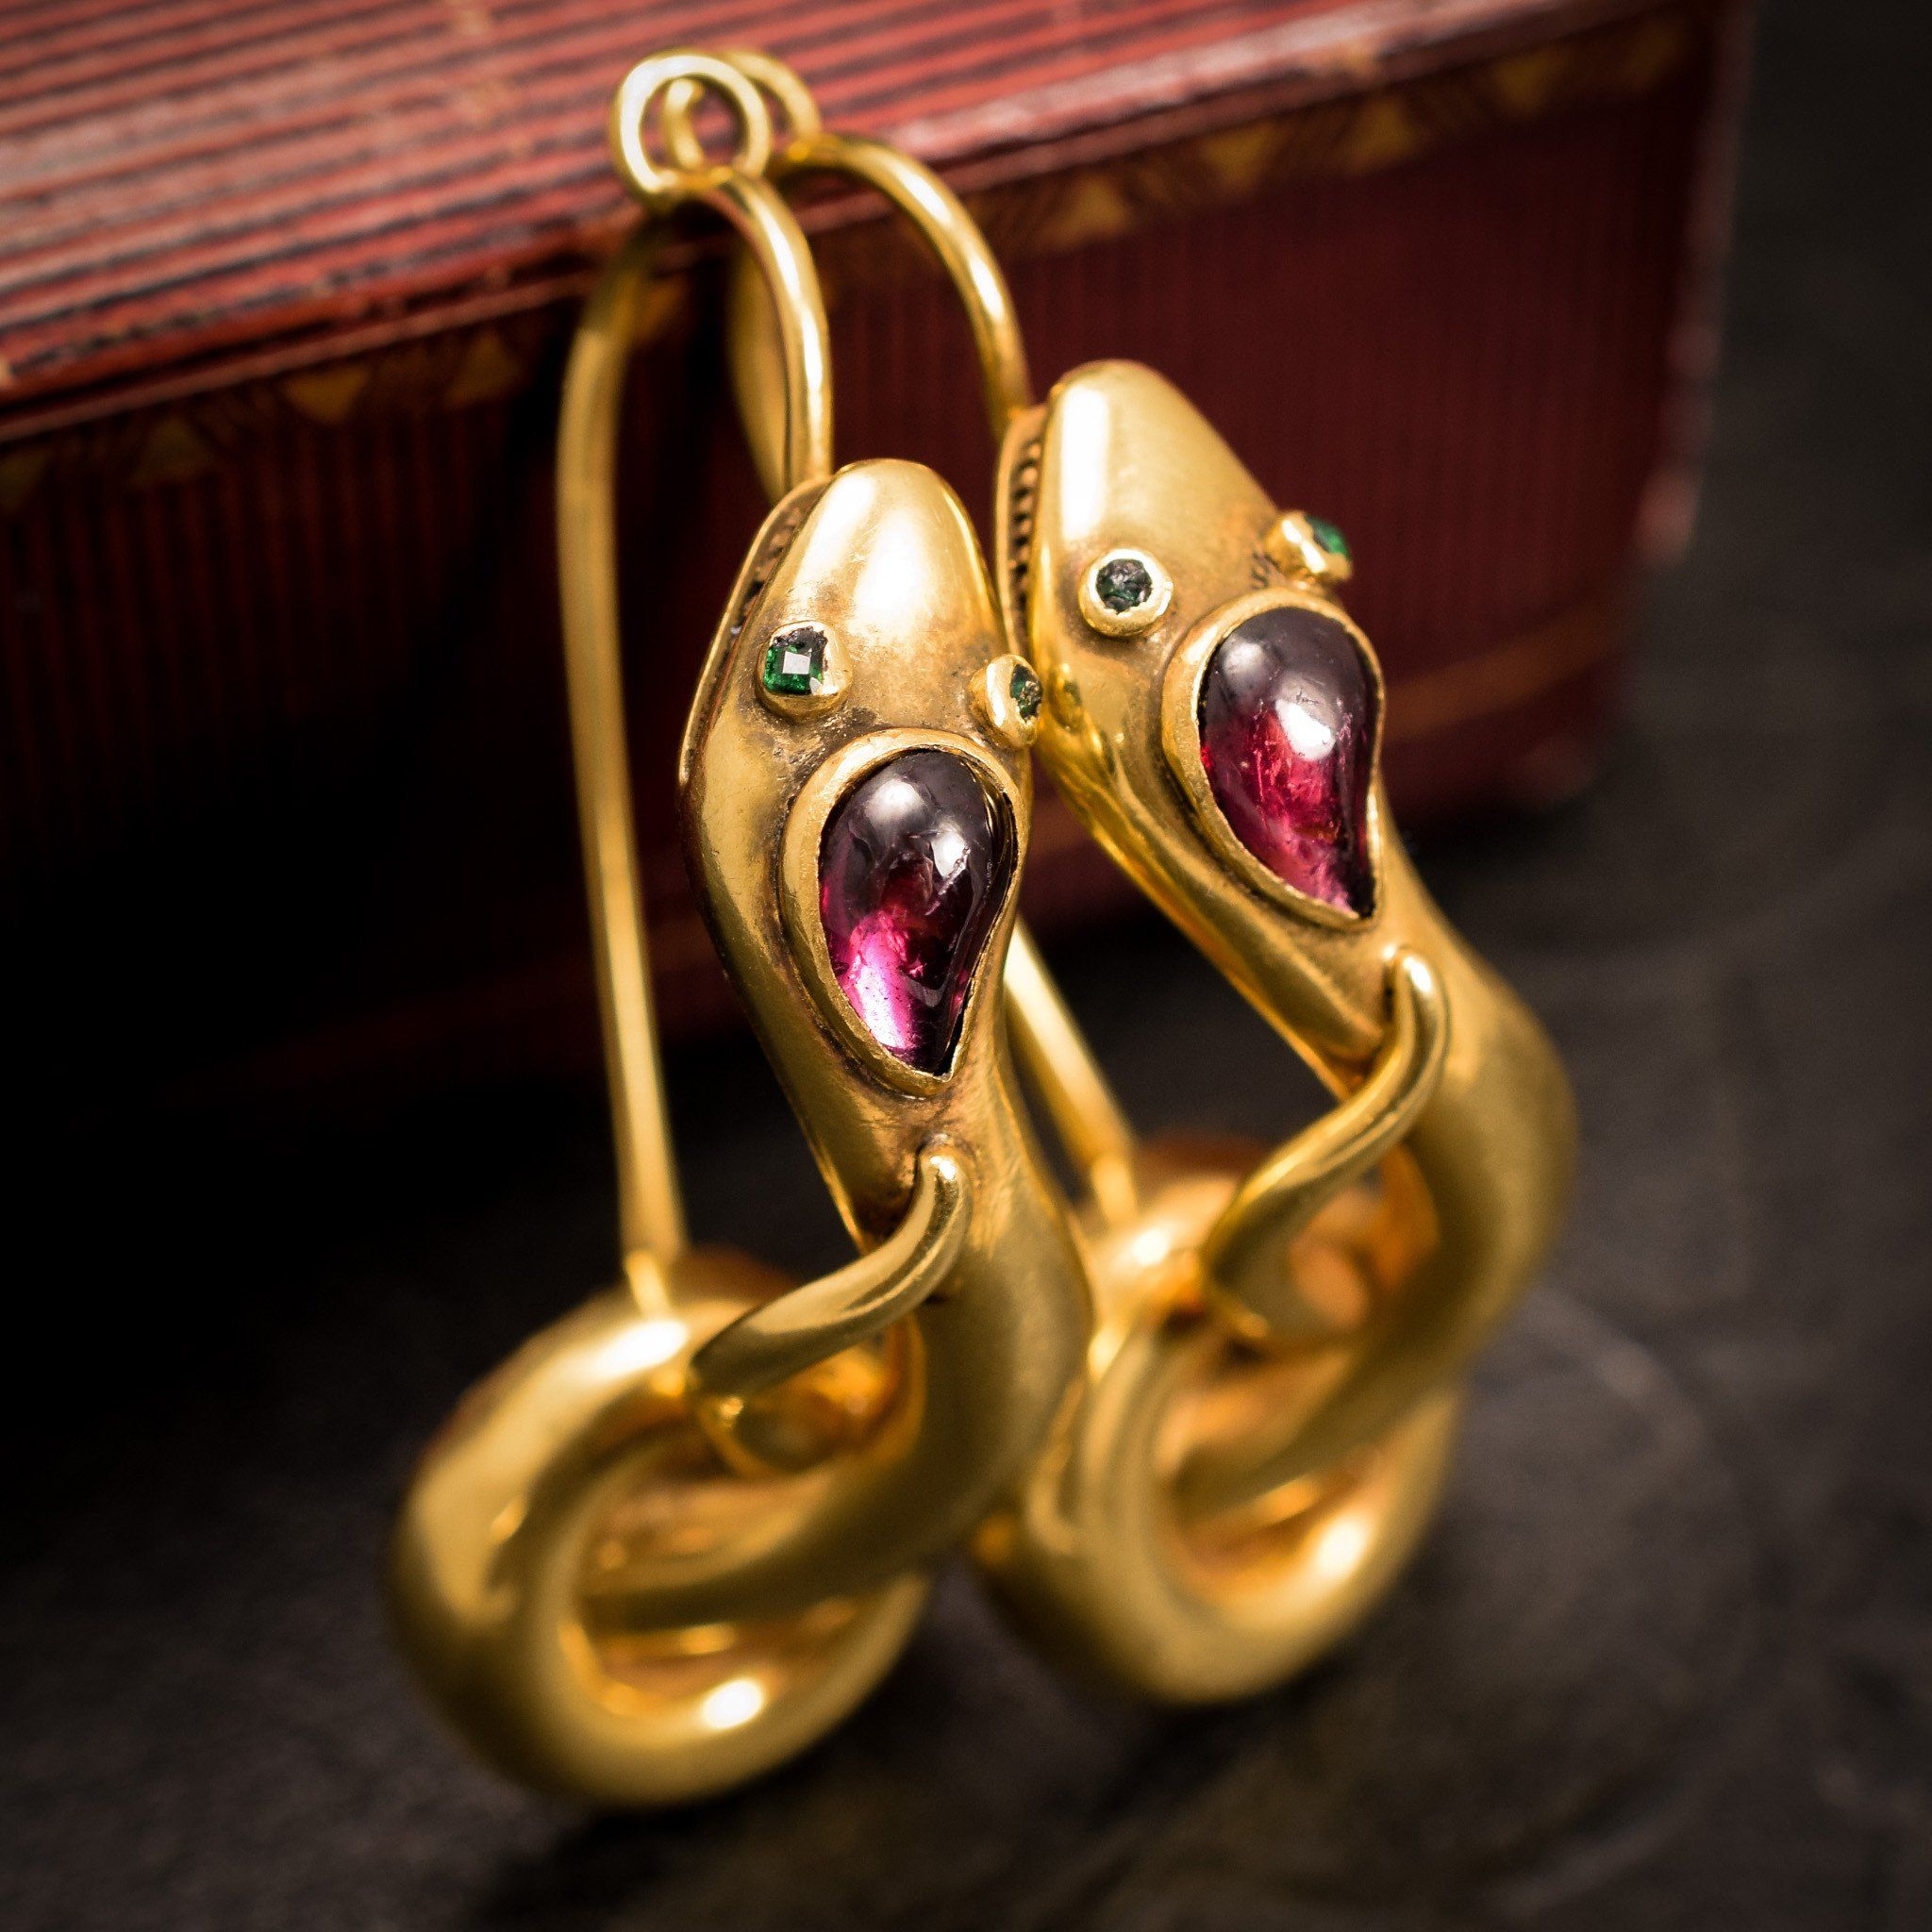 Serpent Earrings with Garnet Cabochons and Emerald Eyes